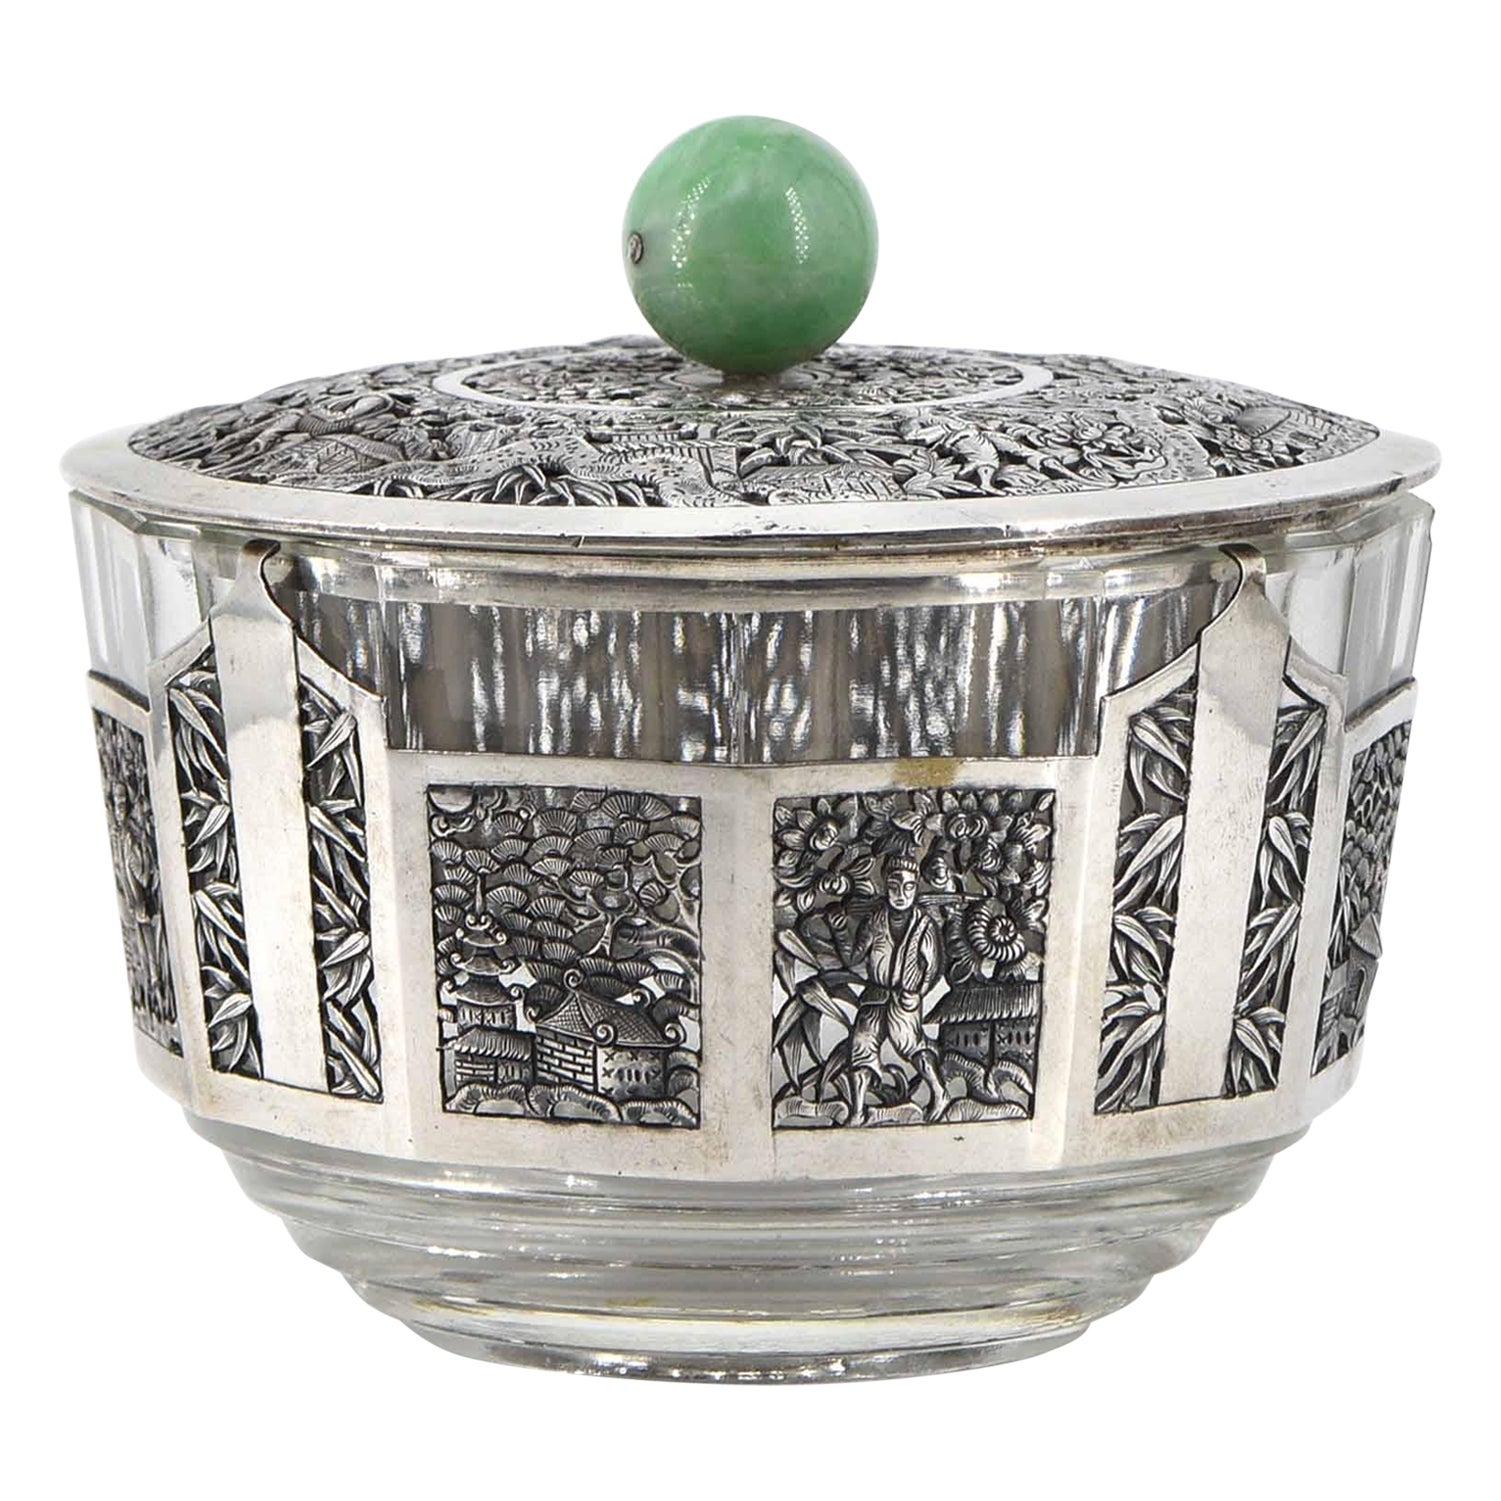 1920s Chinese Silver Plate & Jade Lidded Bowl